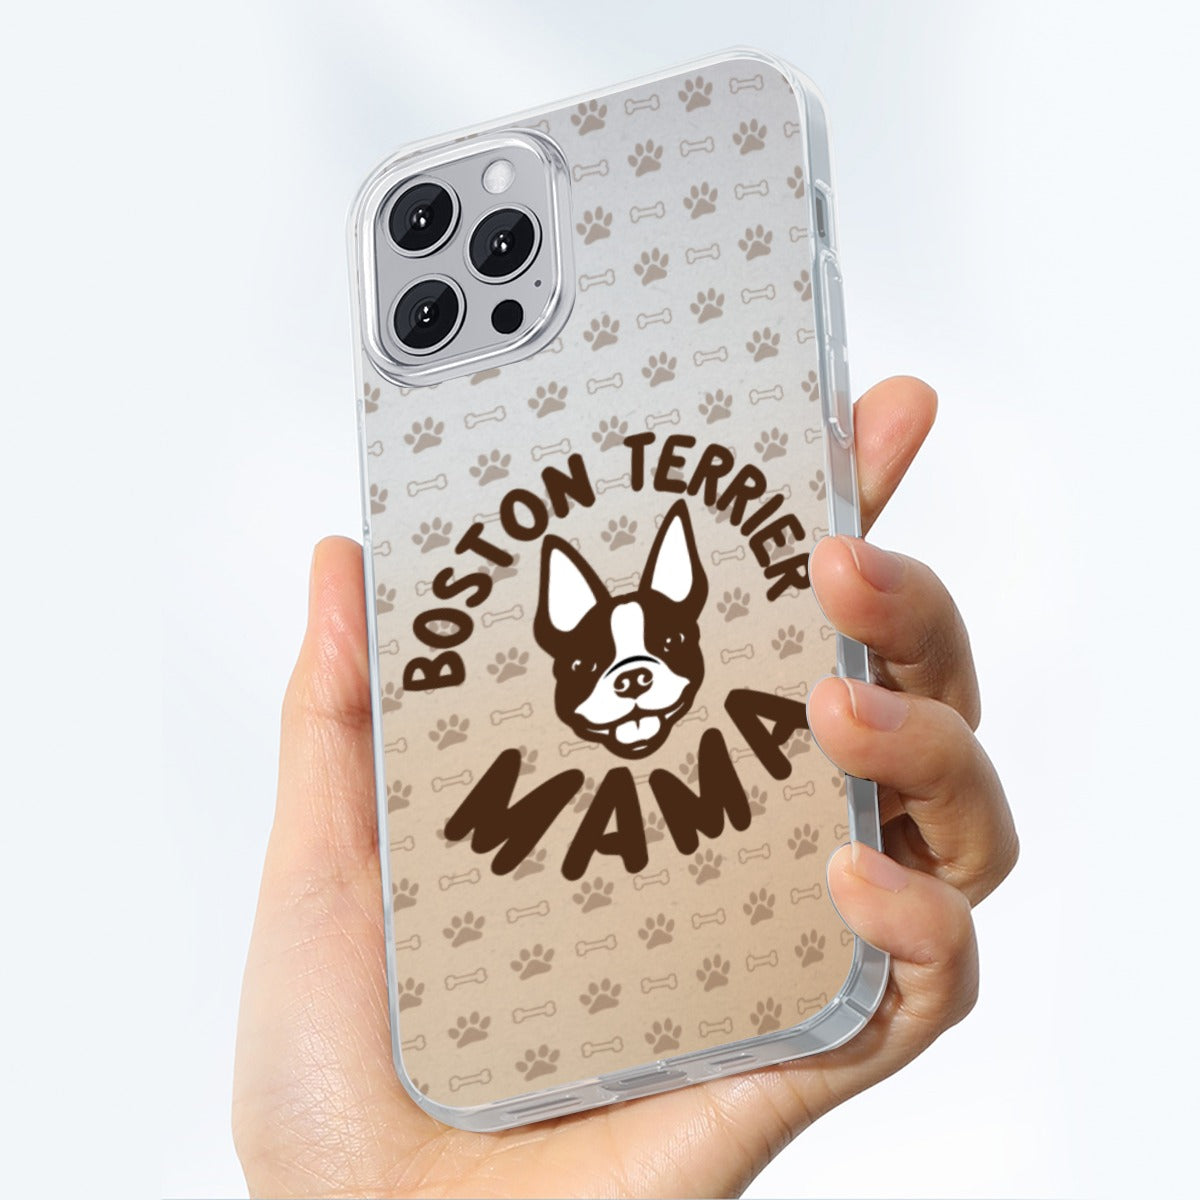 Moose - iPhone case for Boston Terrier lovers